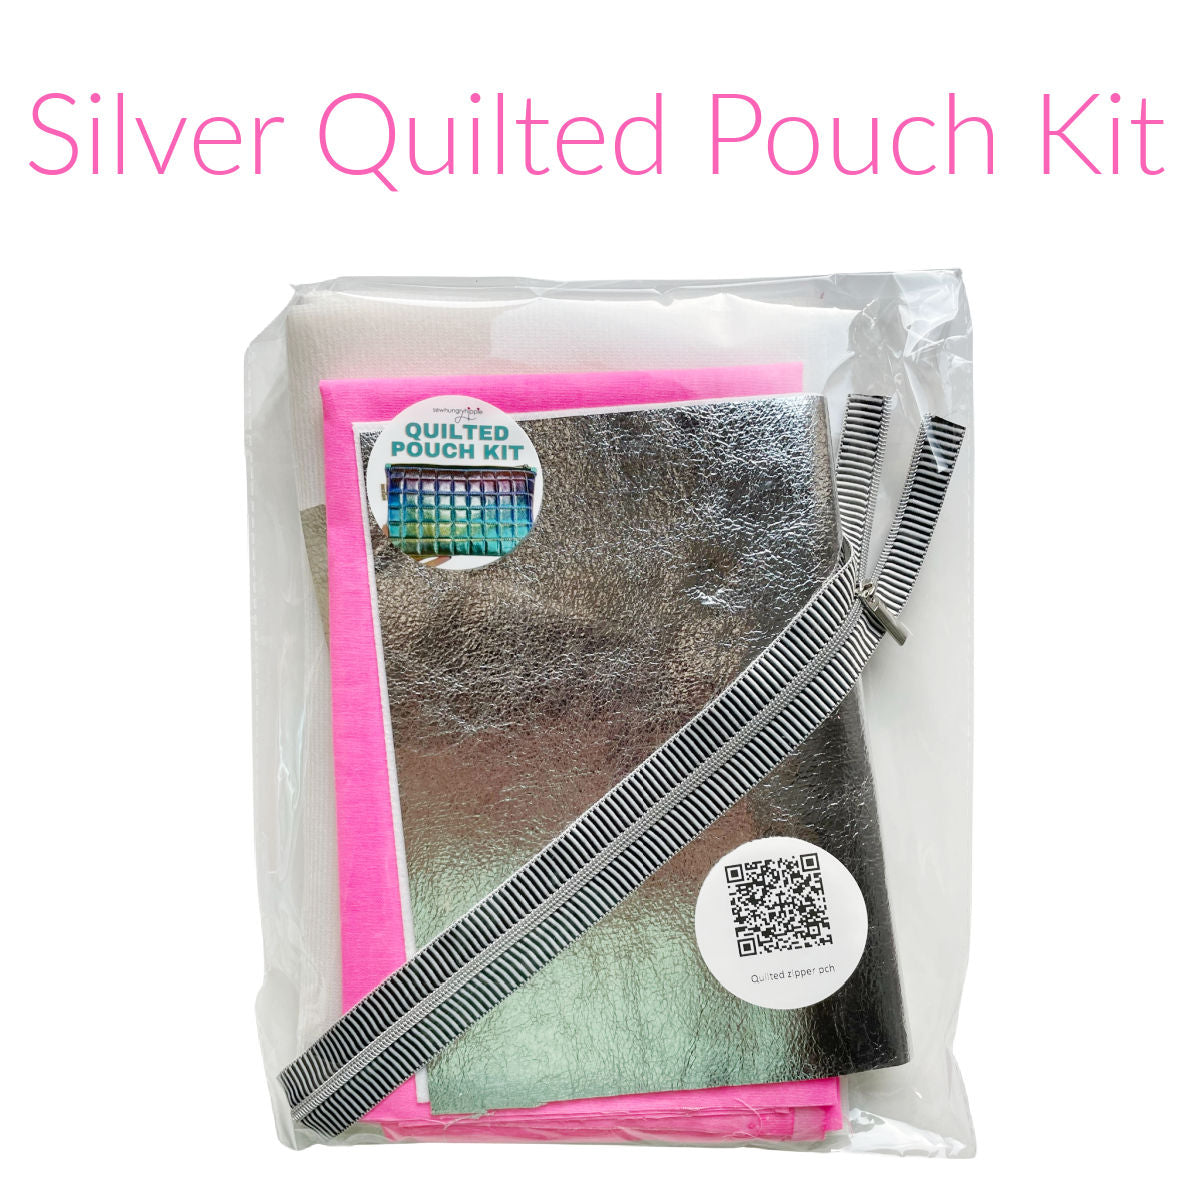 Quilted Pouch Kit Silver